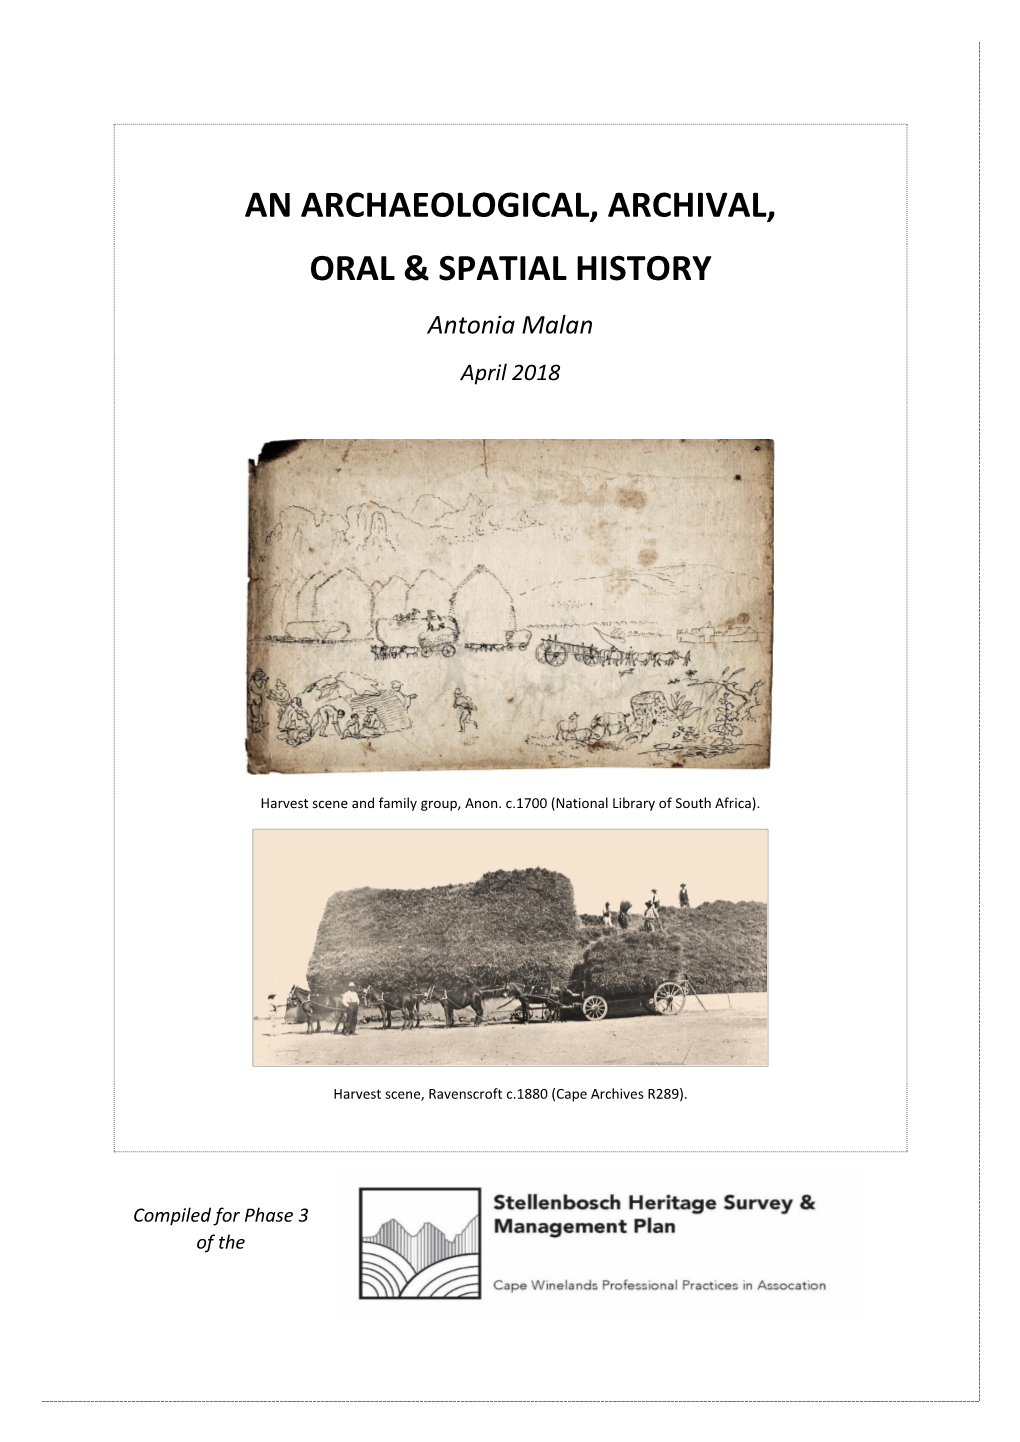 An Archaeological, Archival, Oral & Spatial History